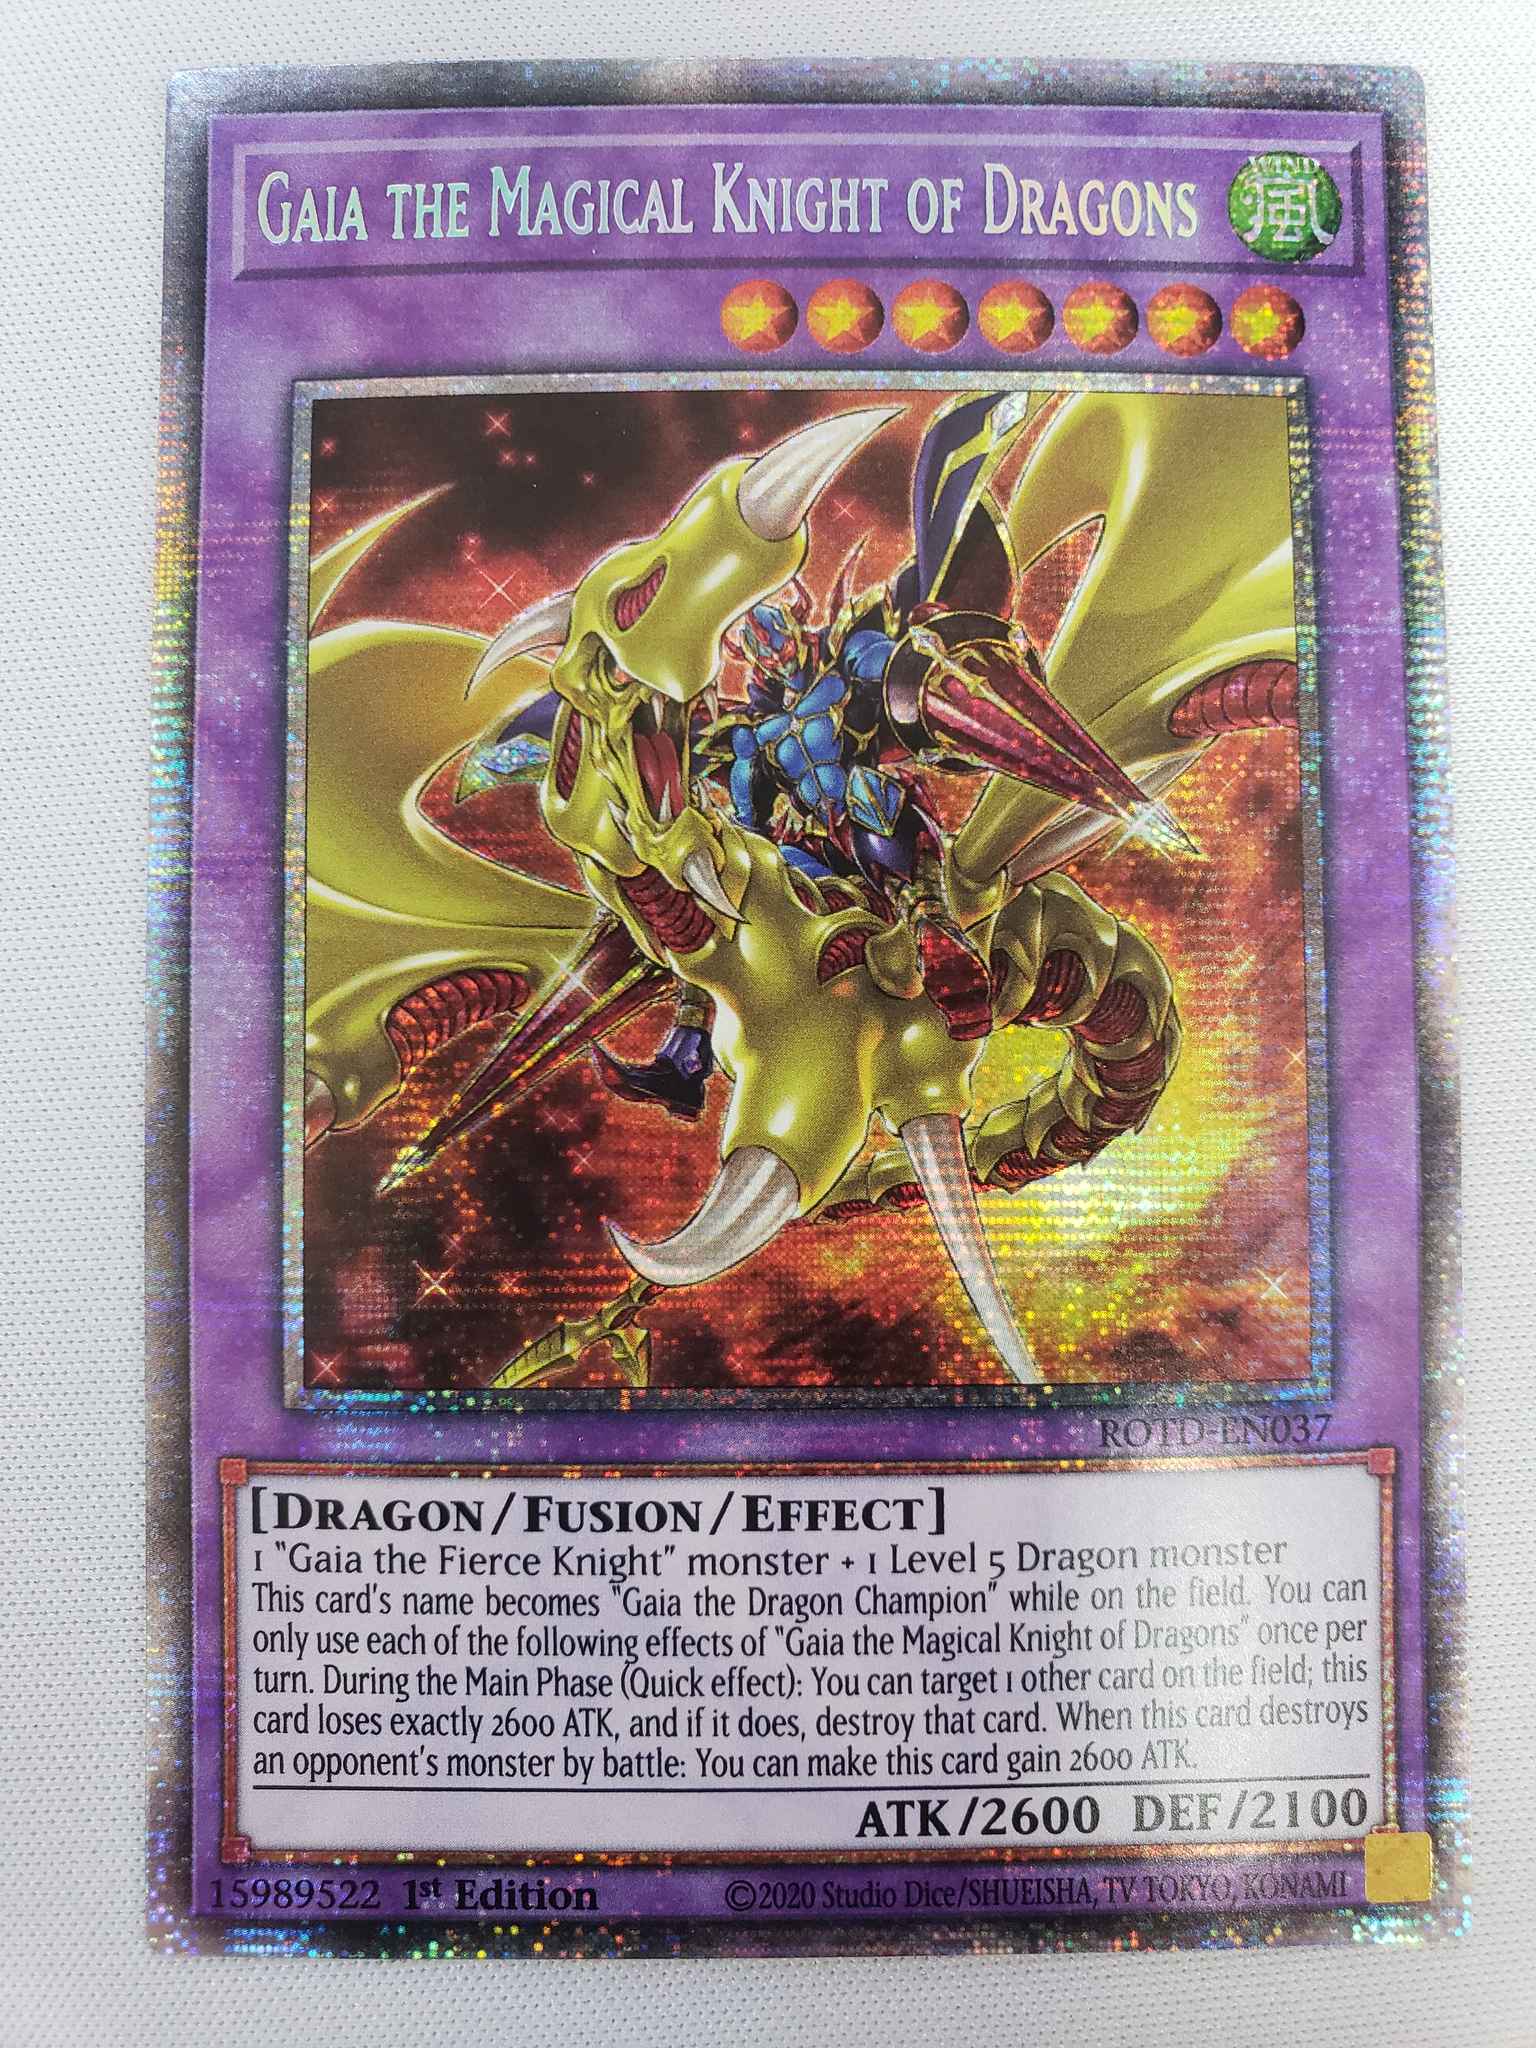 ROTD-EN037 Super Rare 1st Edition Gaia the Magical Knight of Dragons 